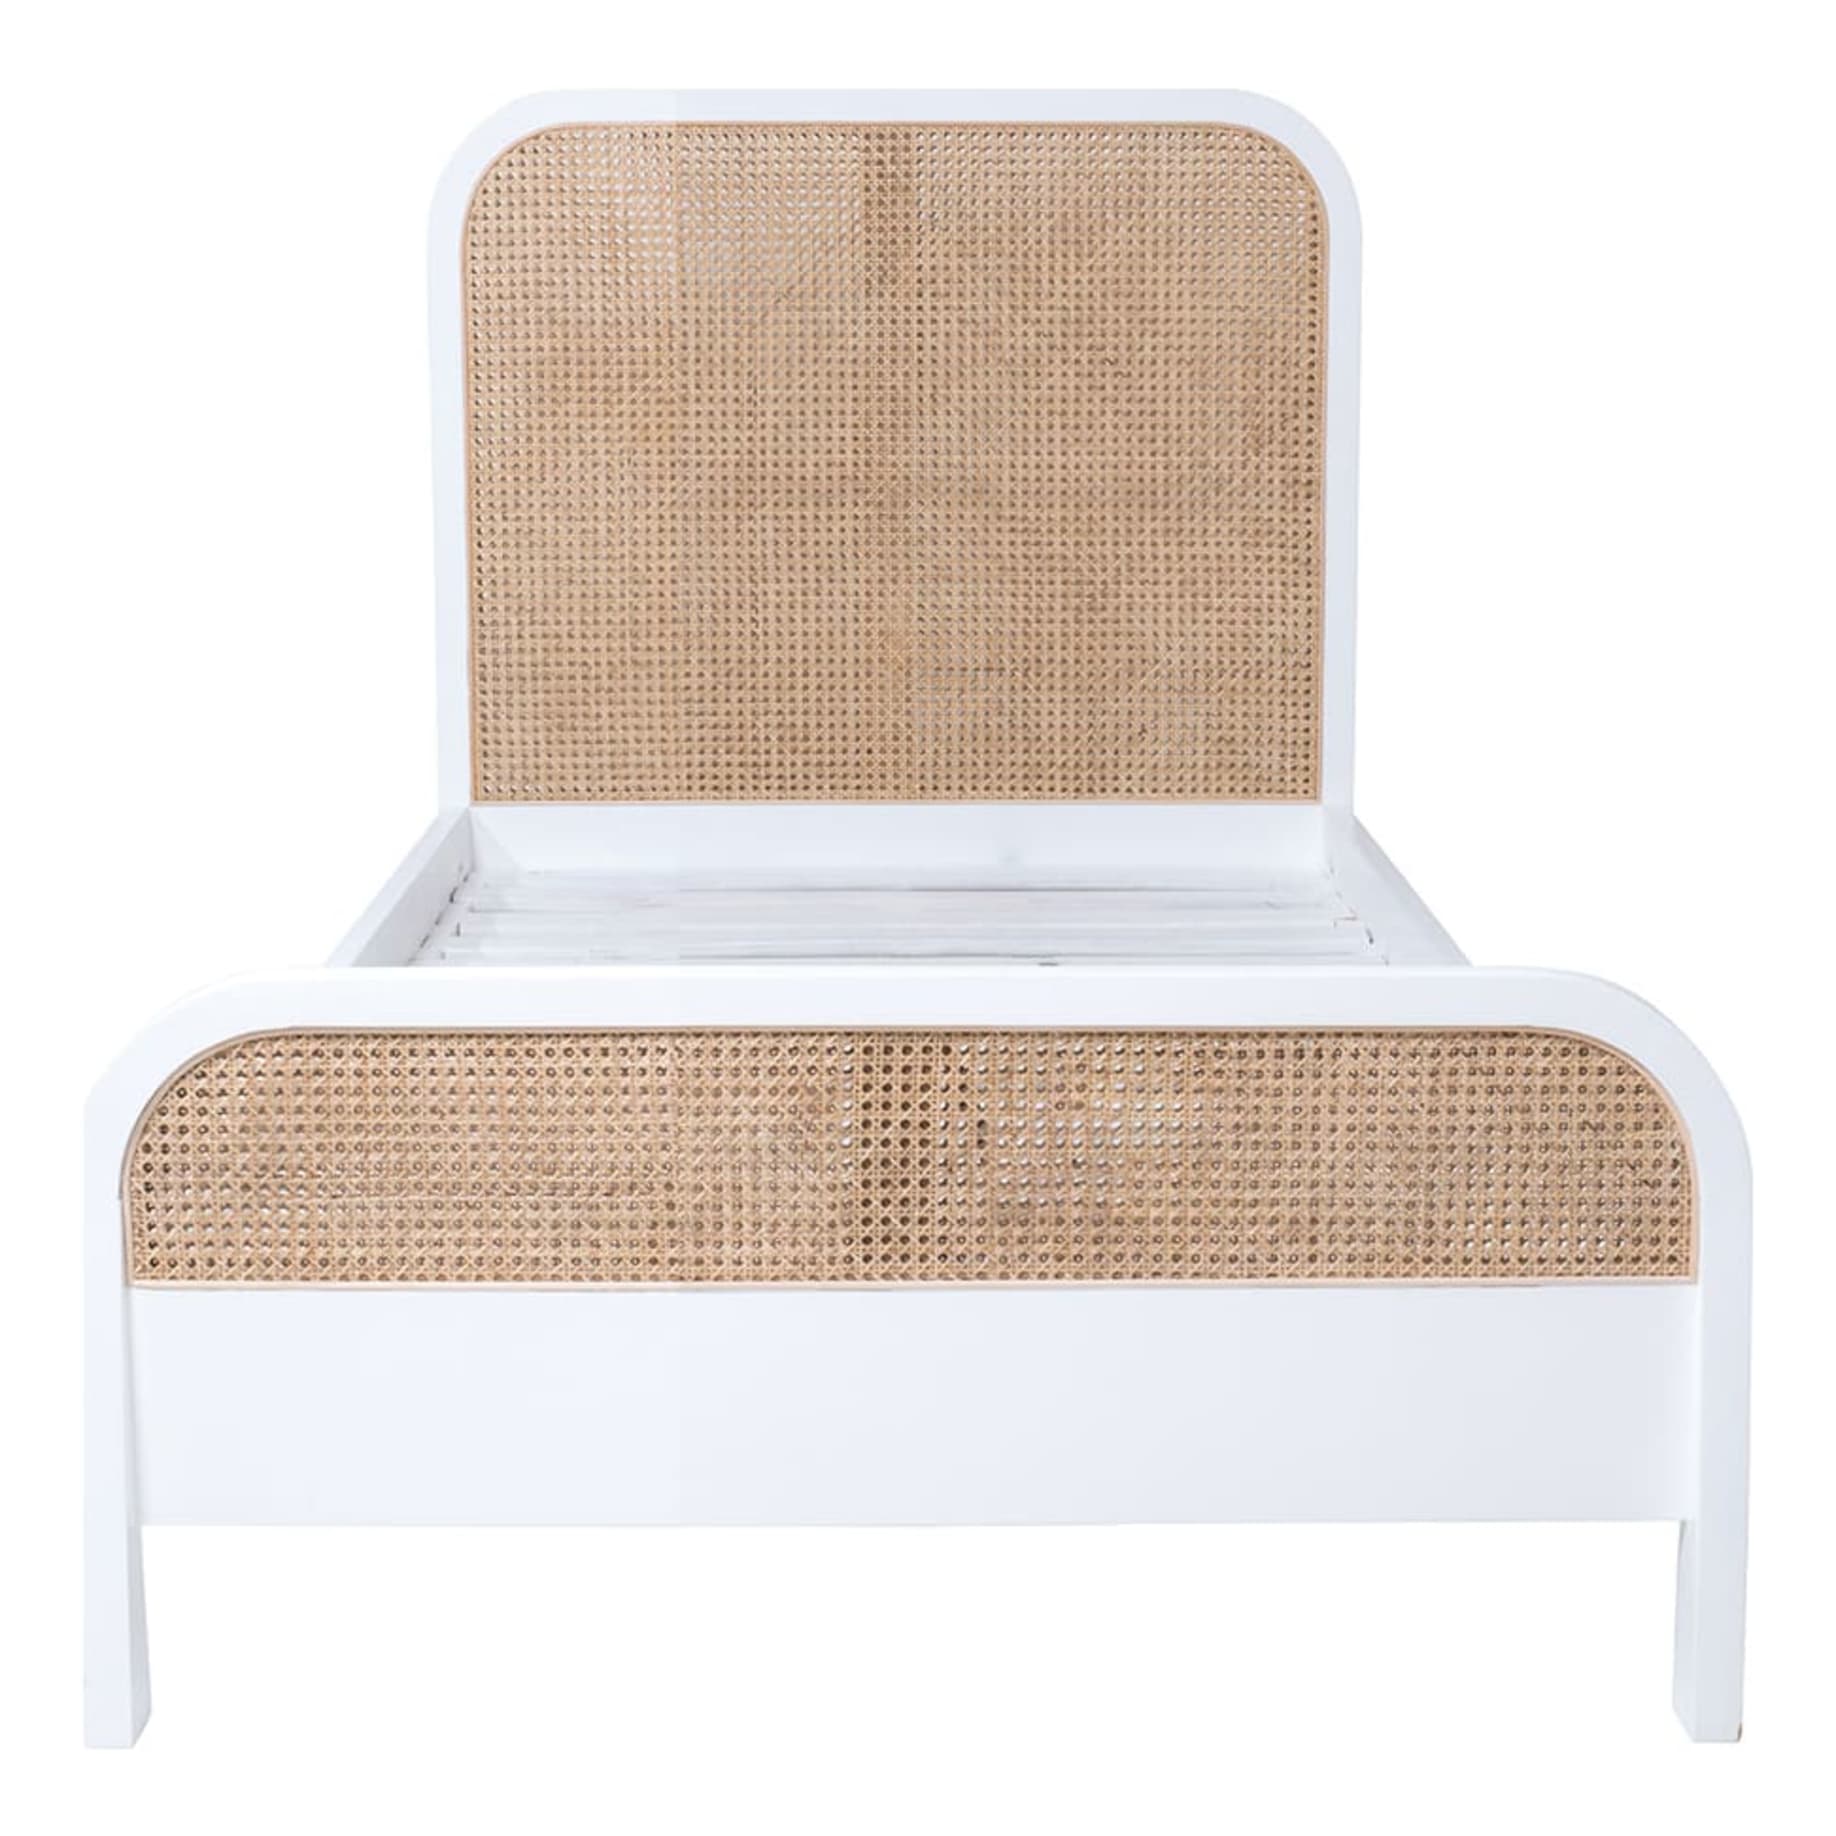 Willow Single Bed in Mangowood/White Rattan